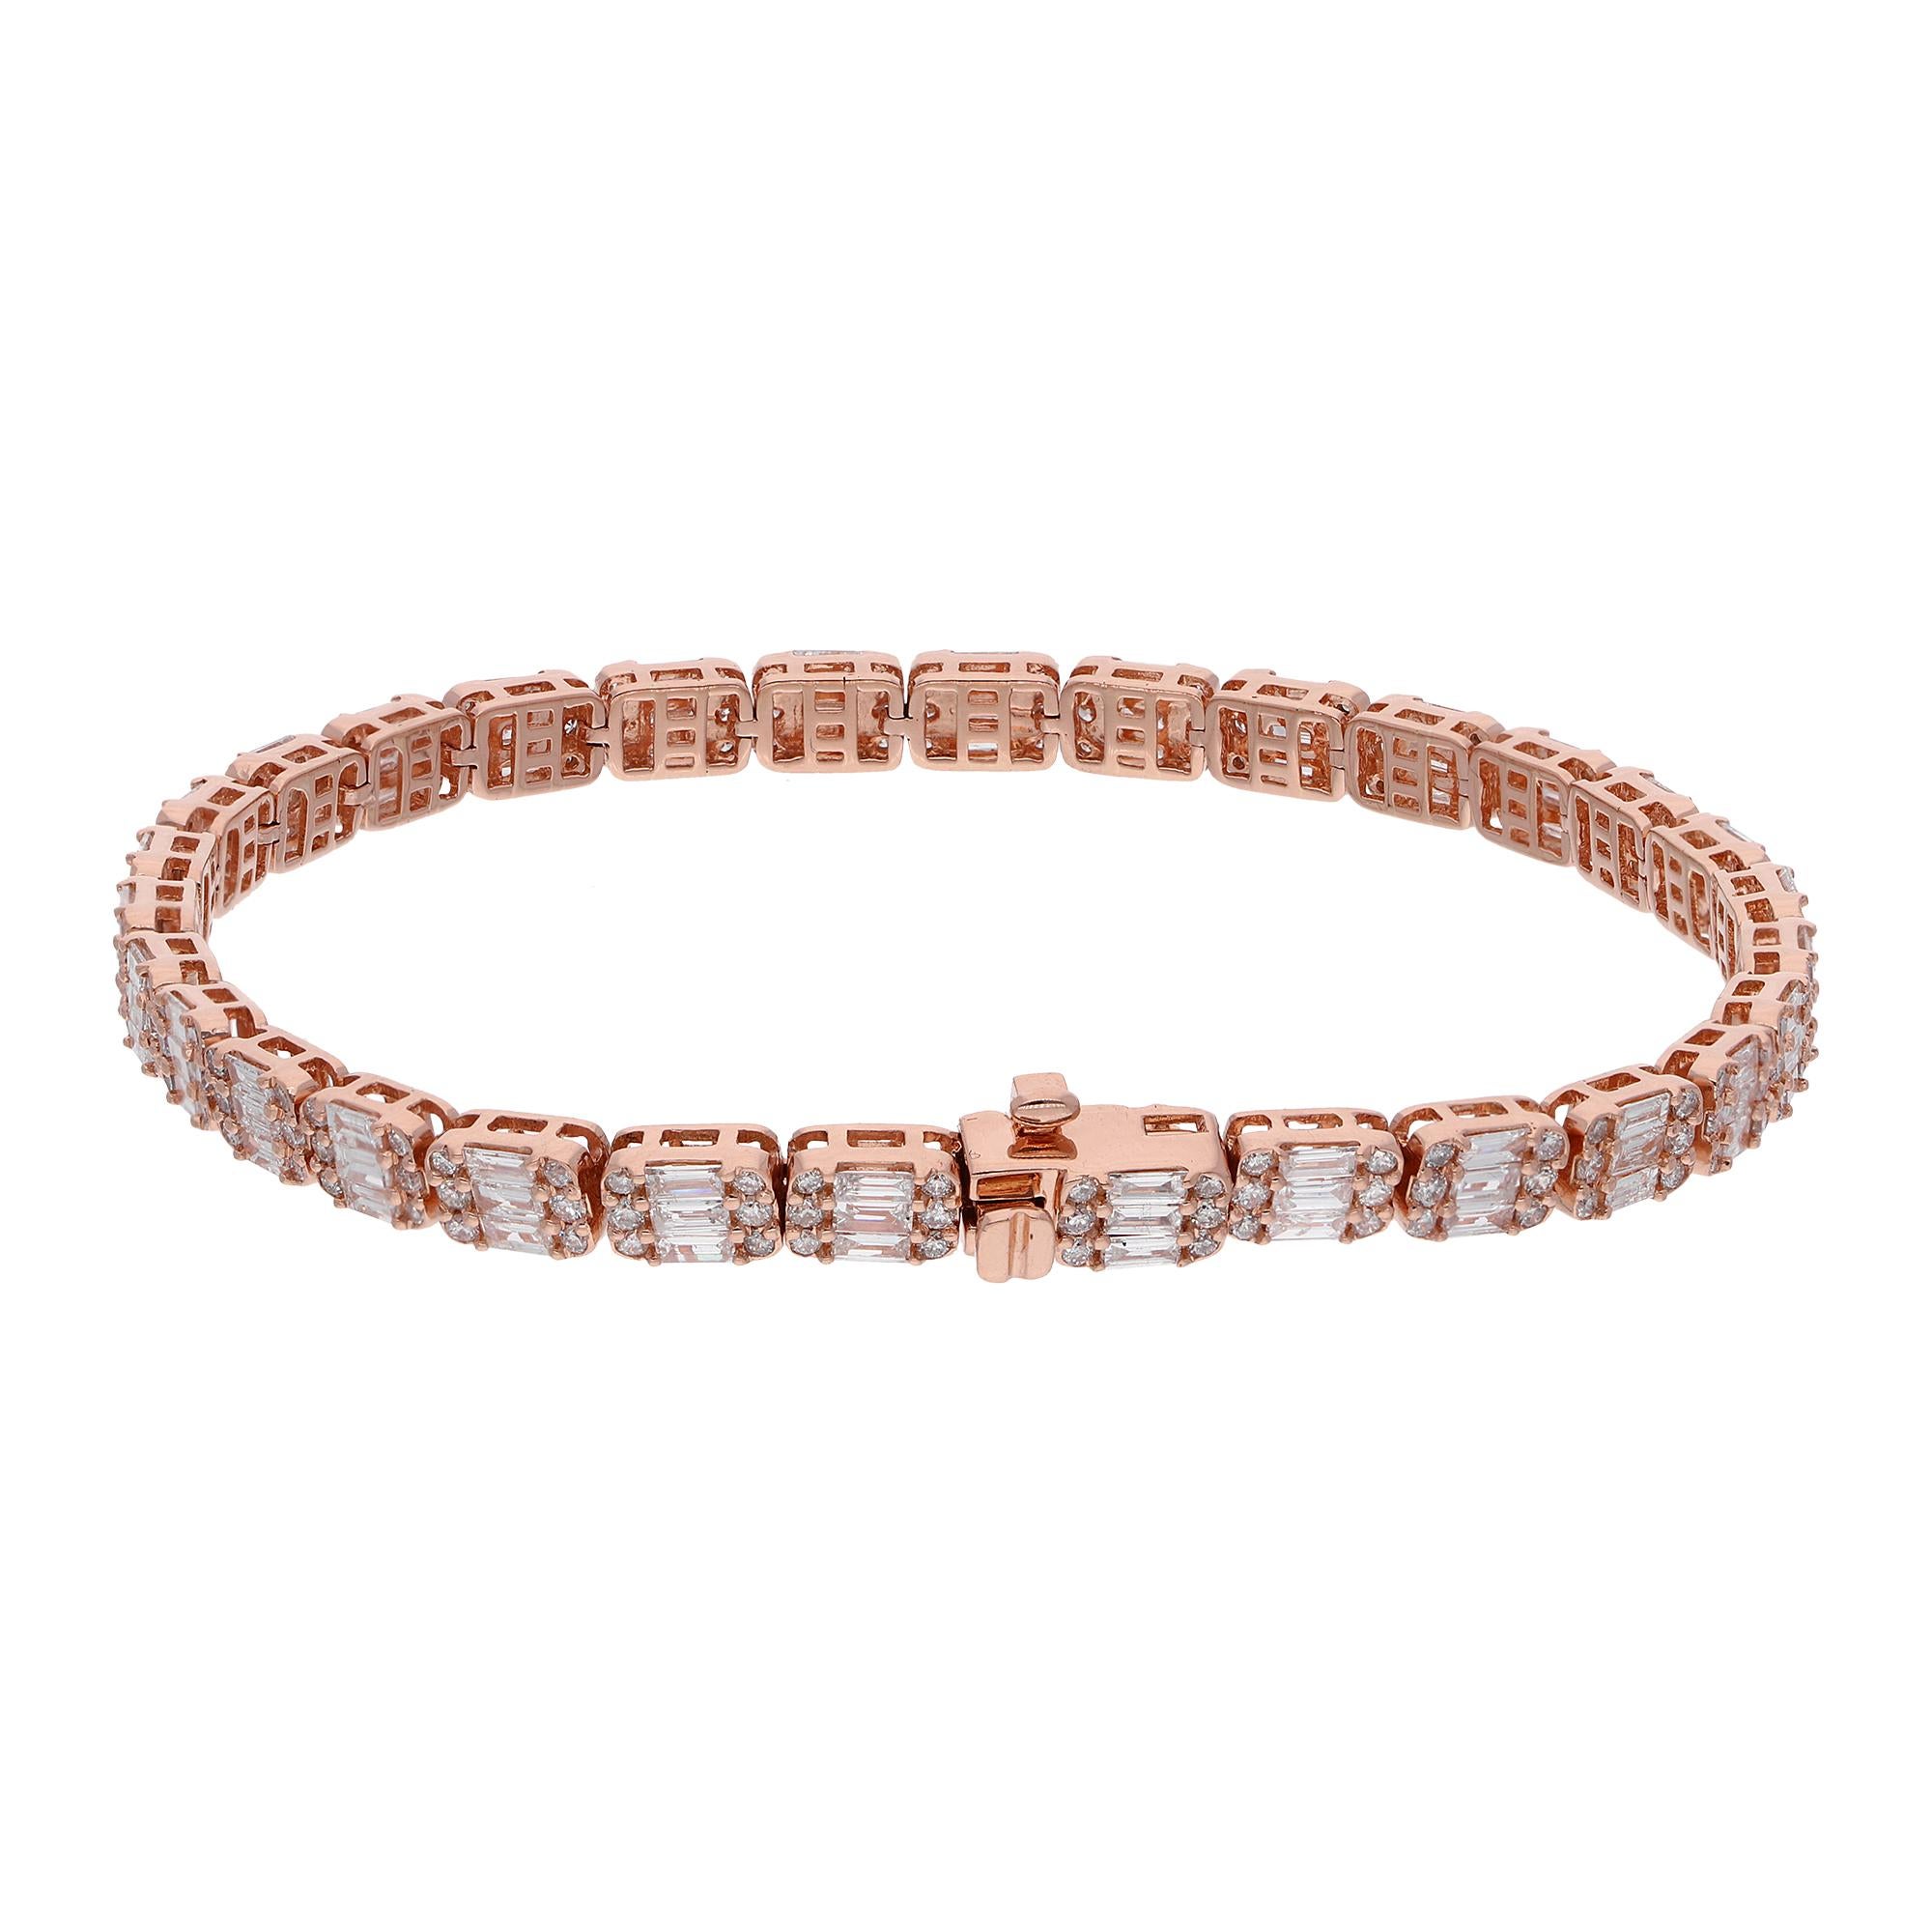 Item Code :- SEBR-42226A
Gross Wt. :- 17.26 gm
18k Rose Gold Wt. :- 16.08 gm
Diamond Wt. :- 5.90 Ct. ( AVERAGE DIAMOND CLARITY SI1-SI2 & COLOR H-I )
Bracelet Length :- 7 Inches Long

✦ Sizing
.....................
We can adjust most items to fit